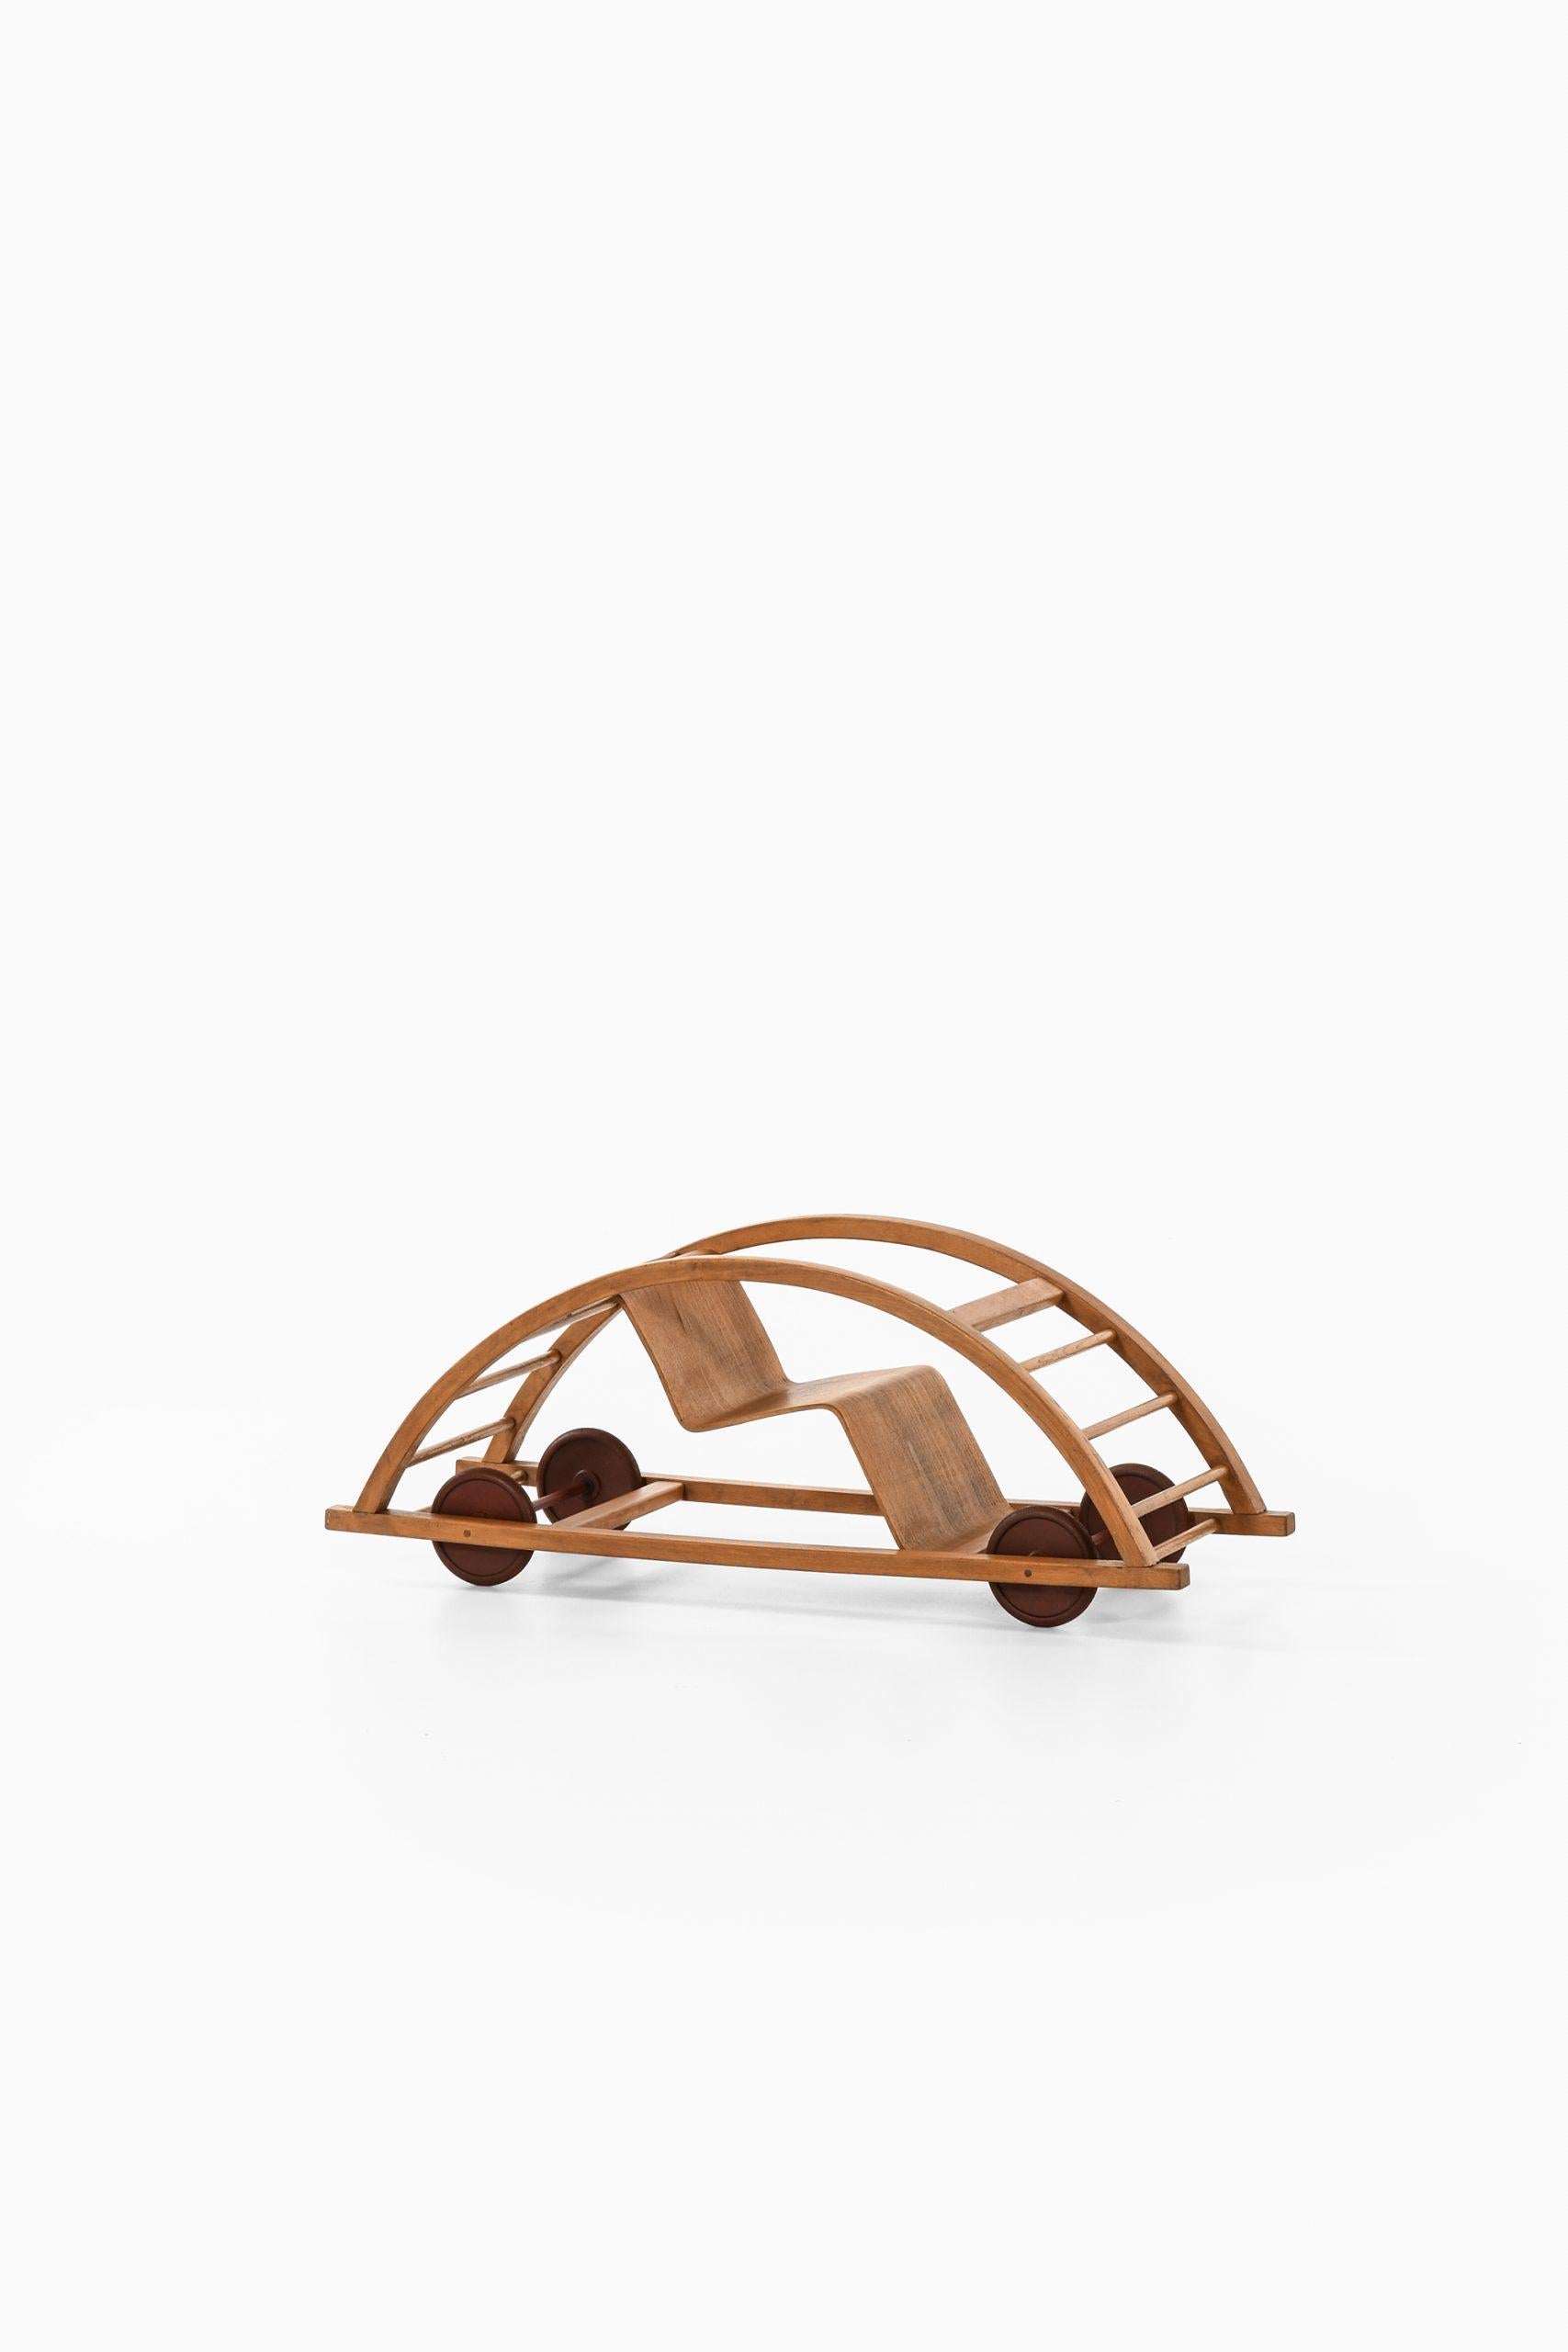 Rare swing cart designed by Hans Brockhage & Erwin Andrea. Produced by Gottfried Lenz in Germany. The swing cart can be used as a toy vehicle or as a rocking chair.